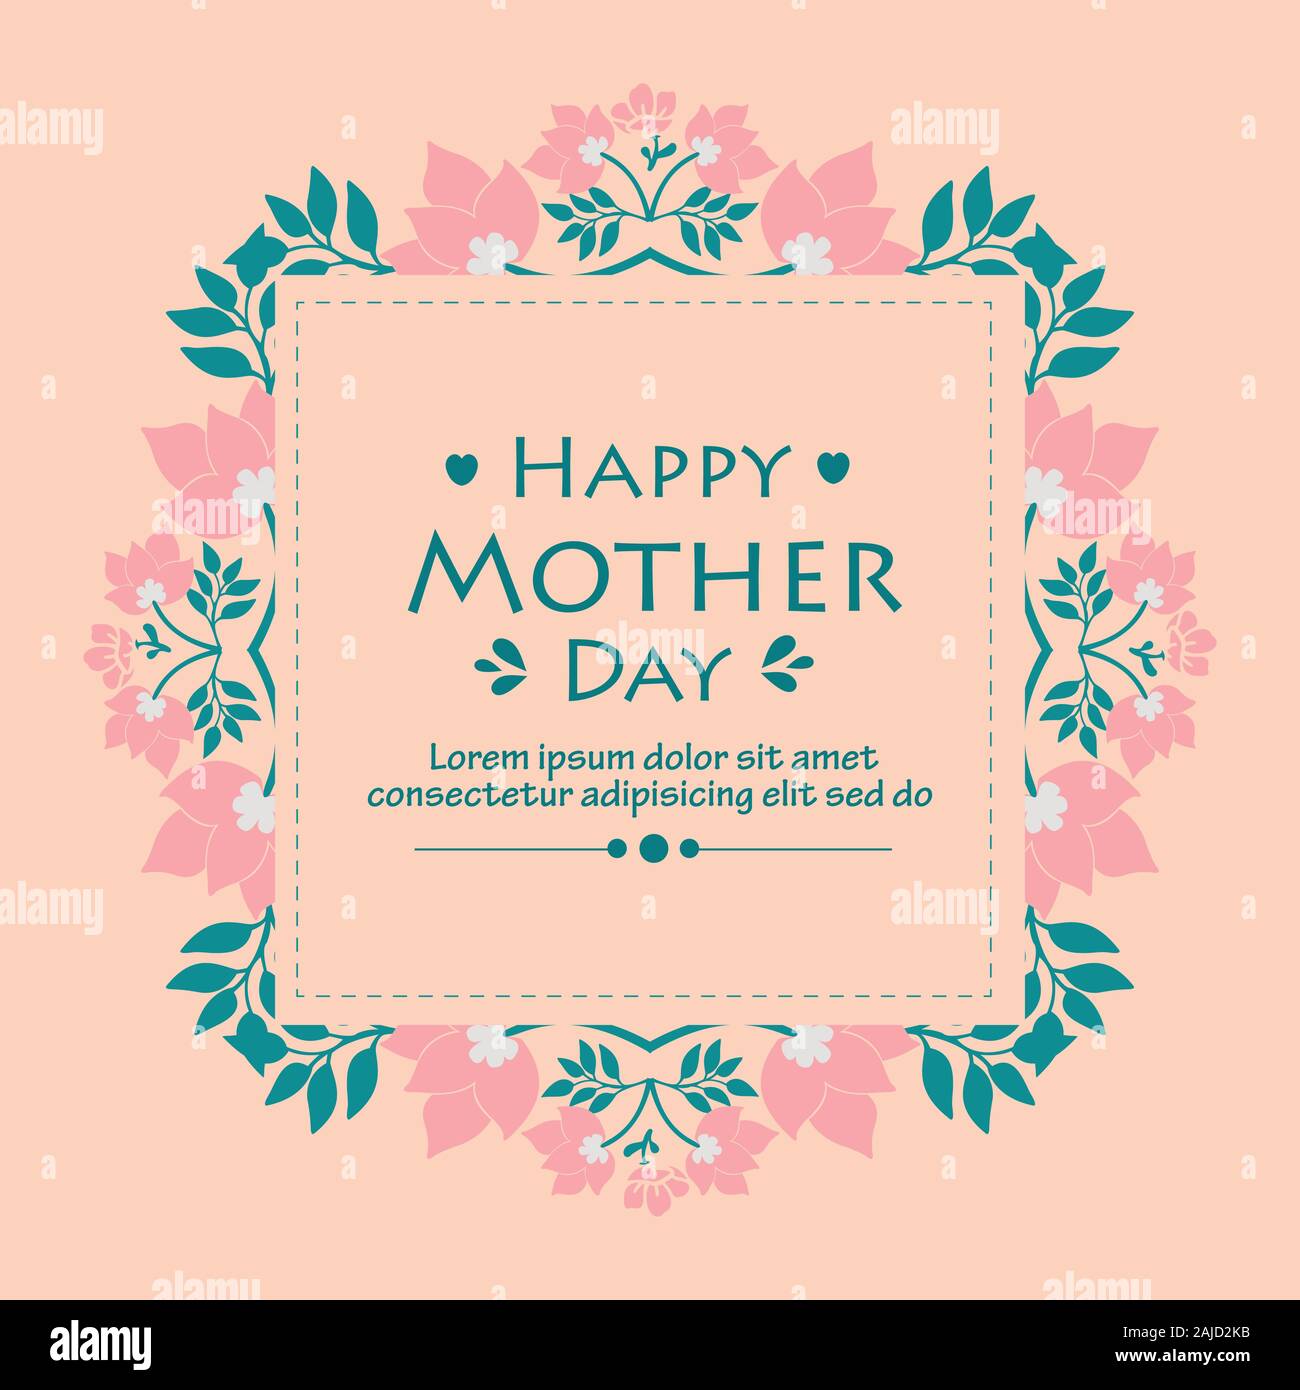 Elegant happy mother day greeting cards, with beautiful wallpaper ...